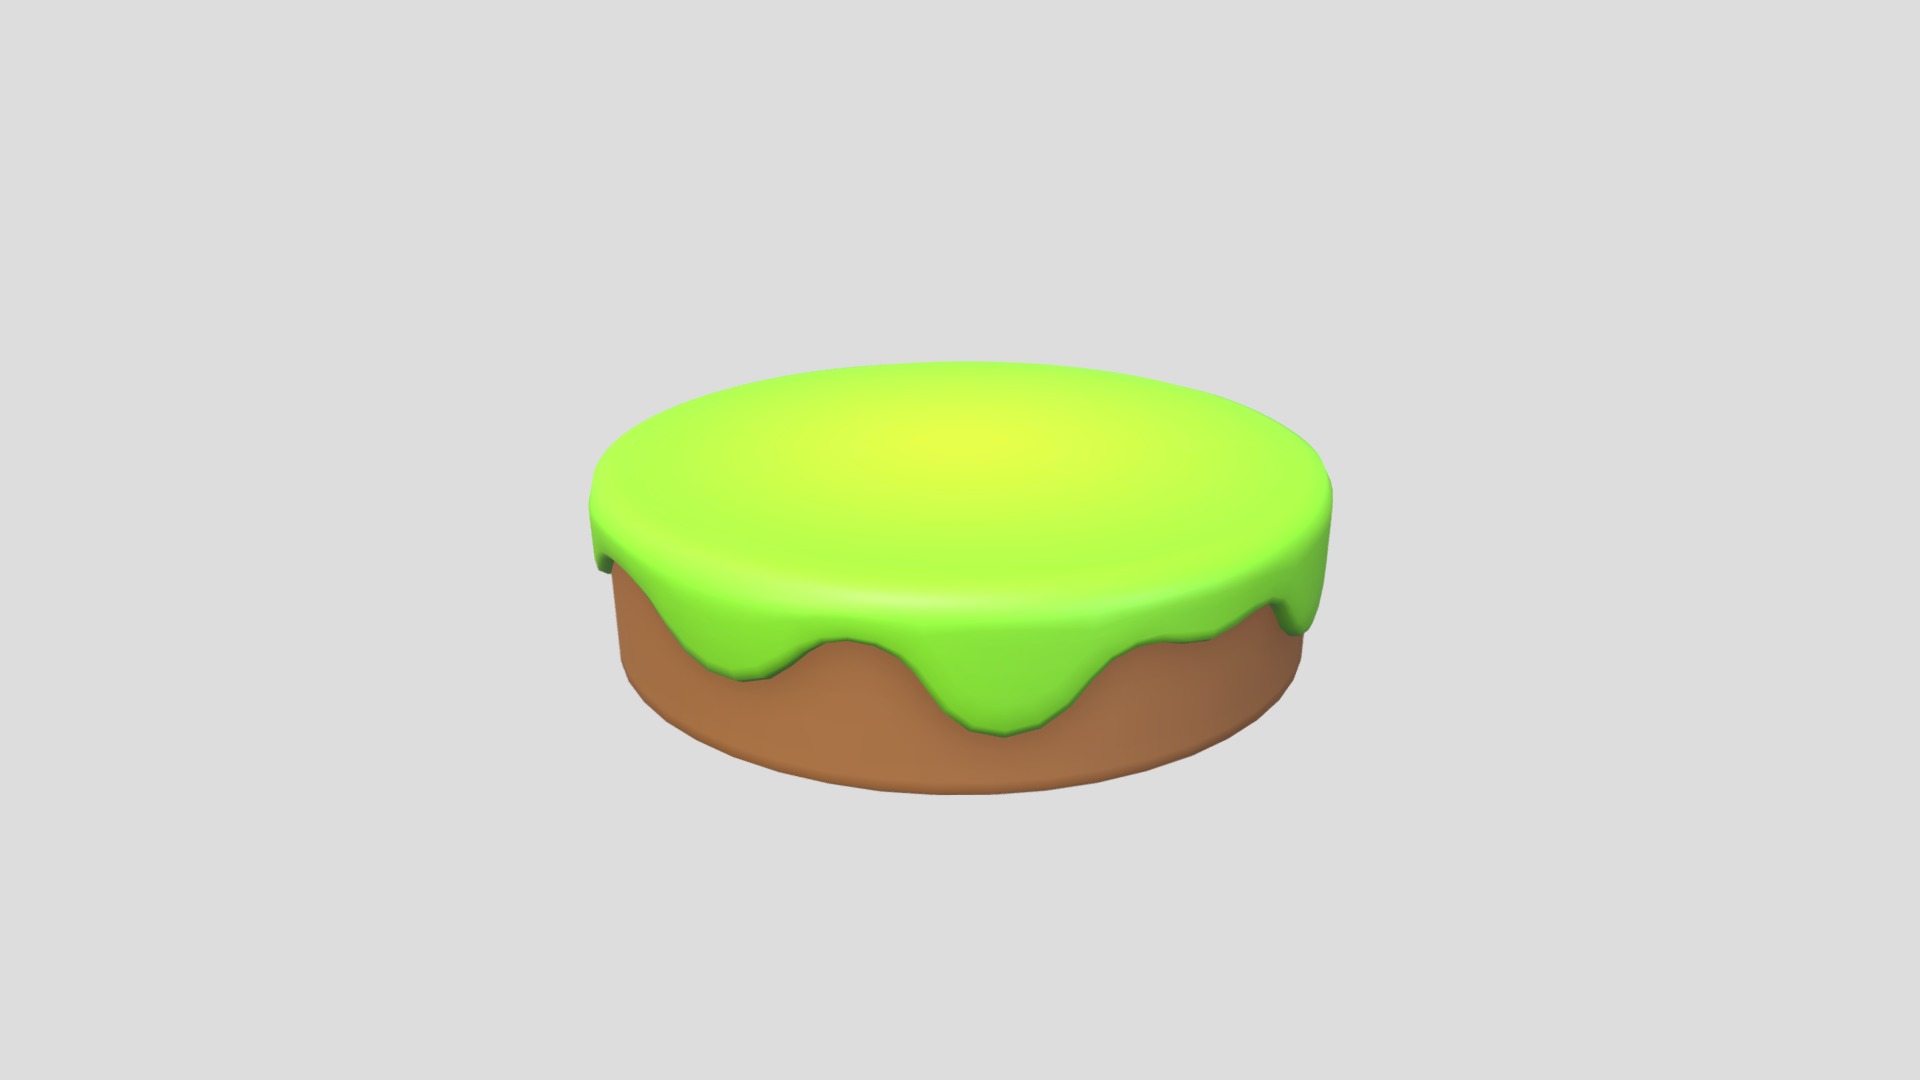 3D model Diorama01 - This is a 3D model of the Diorama01. The 3D model is about a green and white food item.